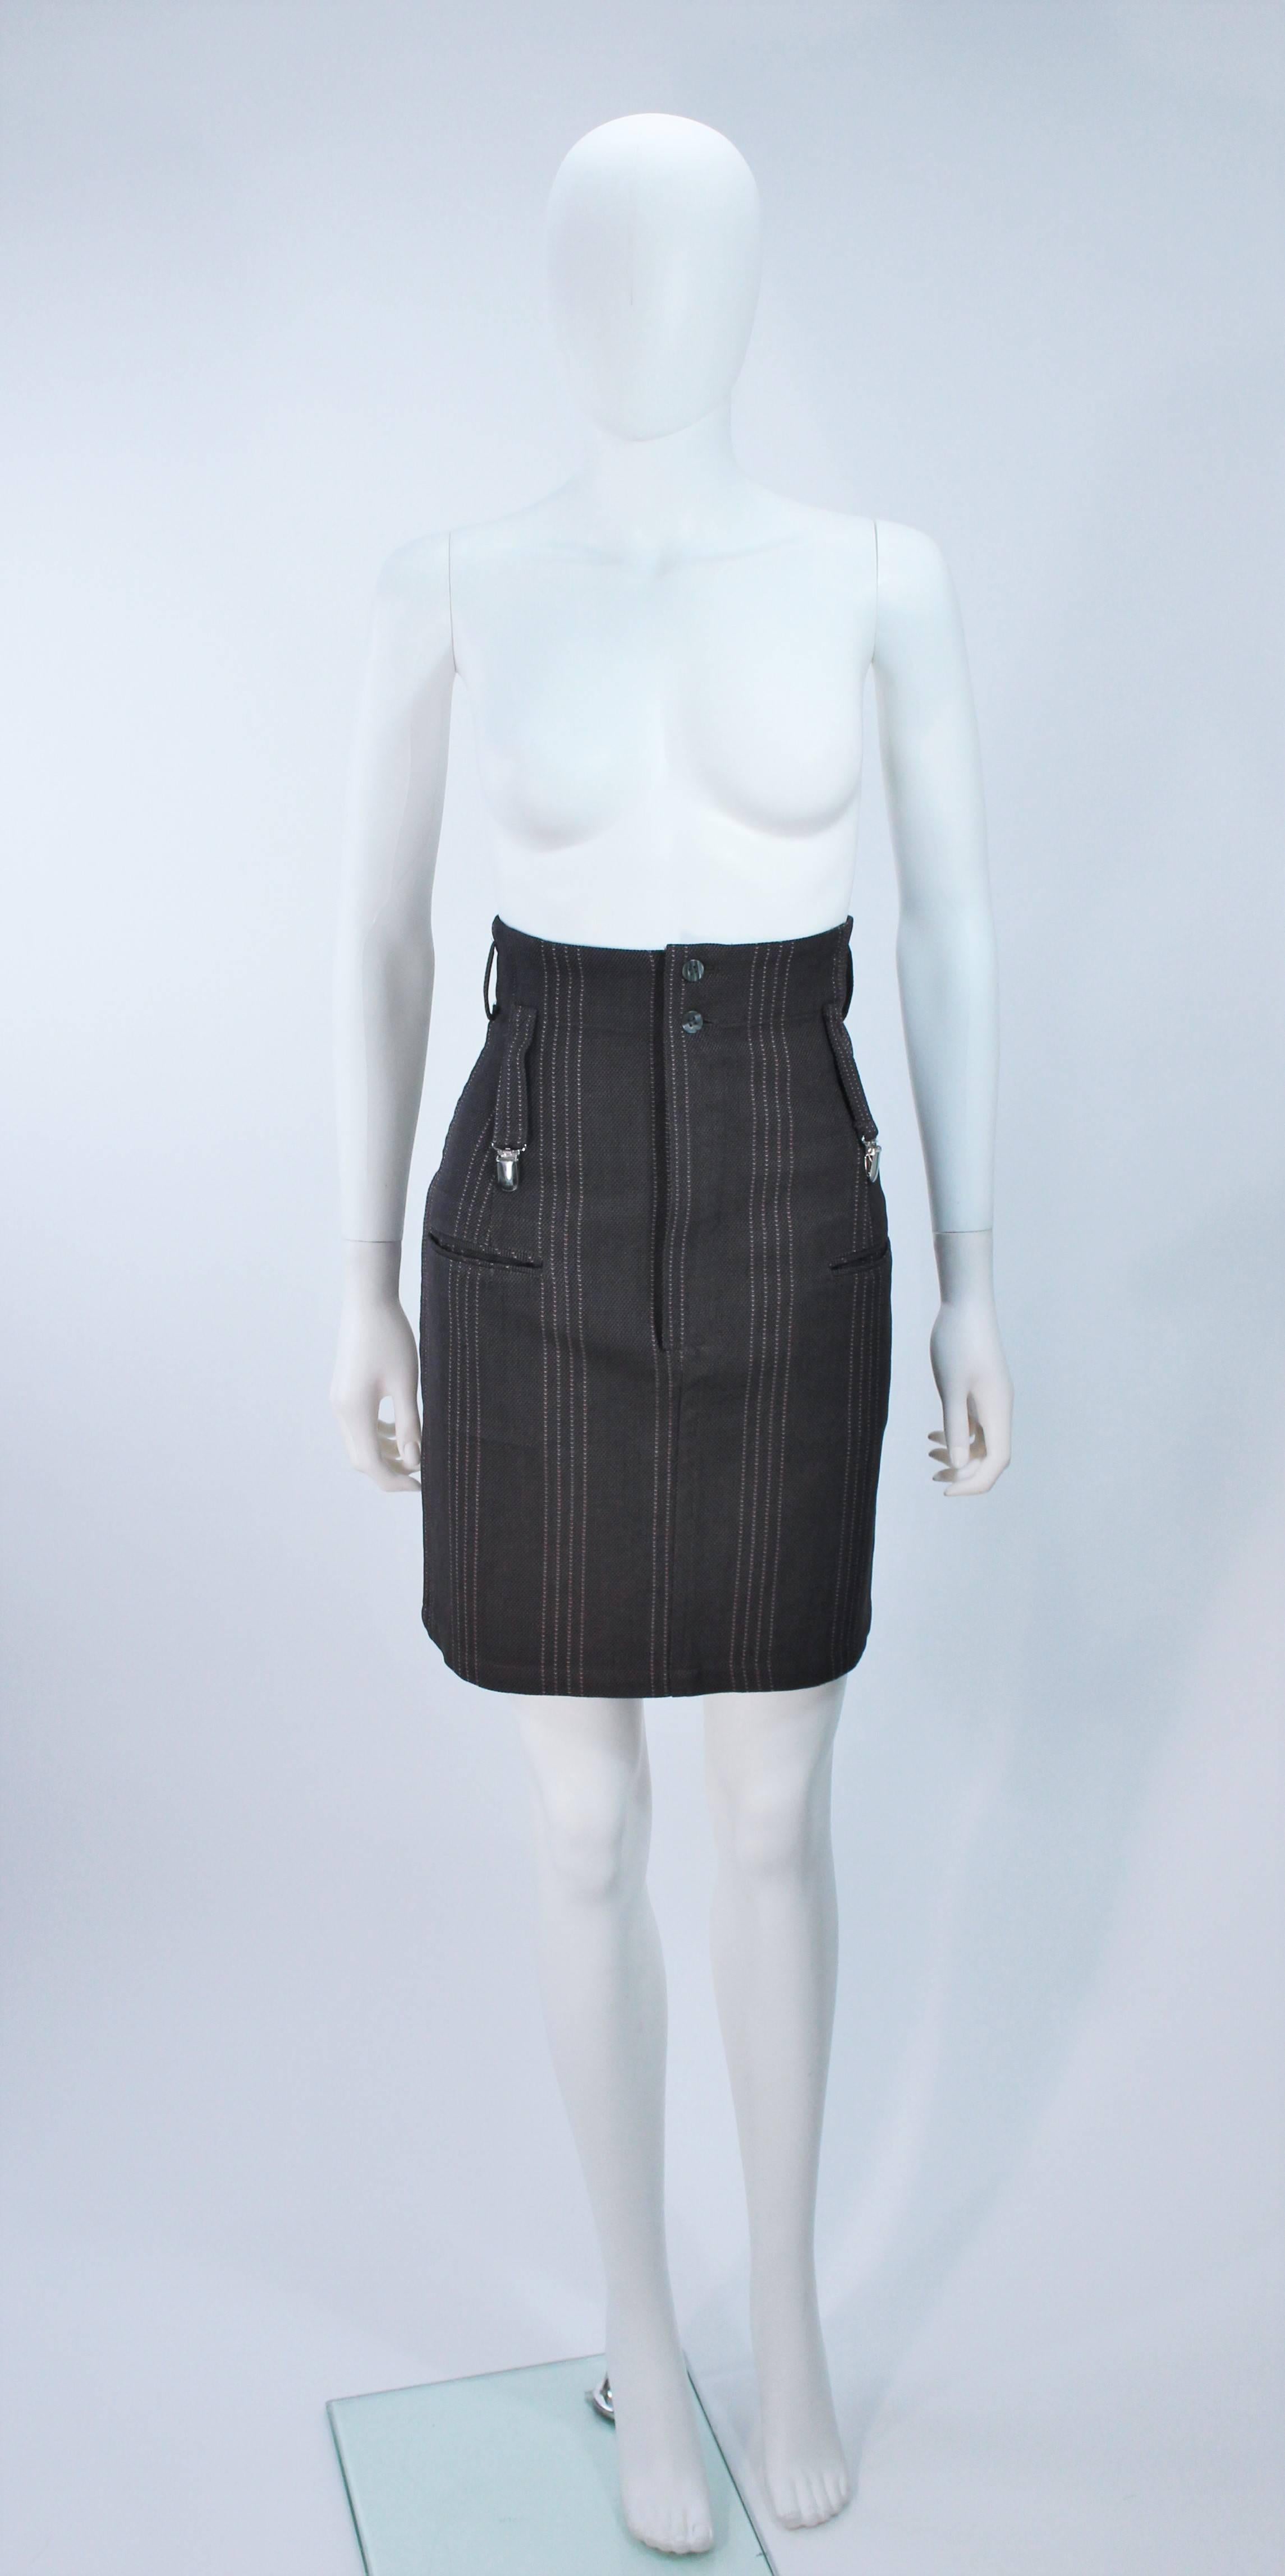  This Yohji Yamamoto skirt is composed of pinstripe wool featuring a suspender detail. There is a center front zipper closure. In excellent vintage condition. 

  **Please cross-reference measurements for personal accuracy.

Measures